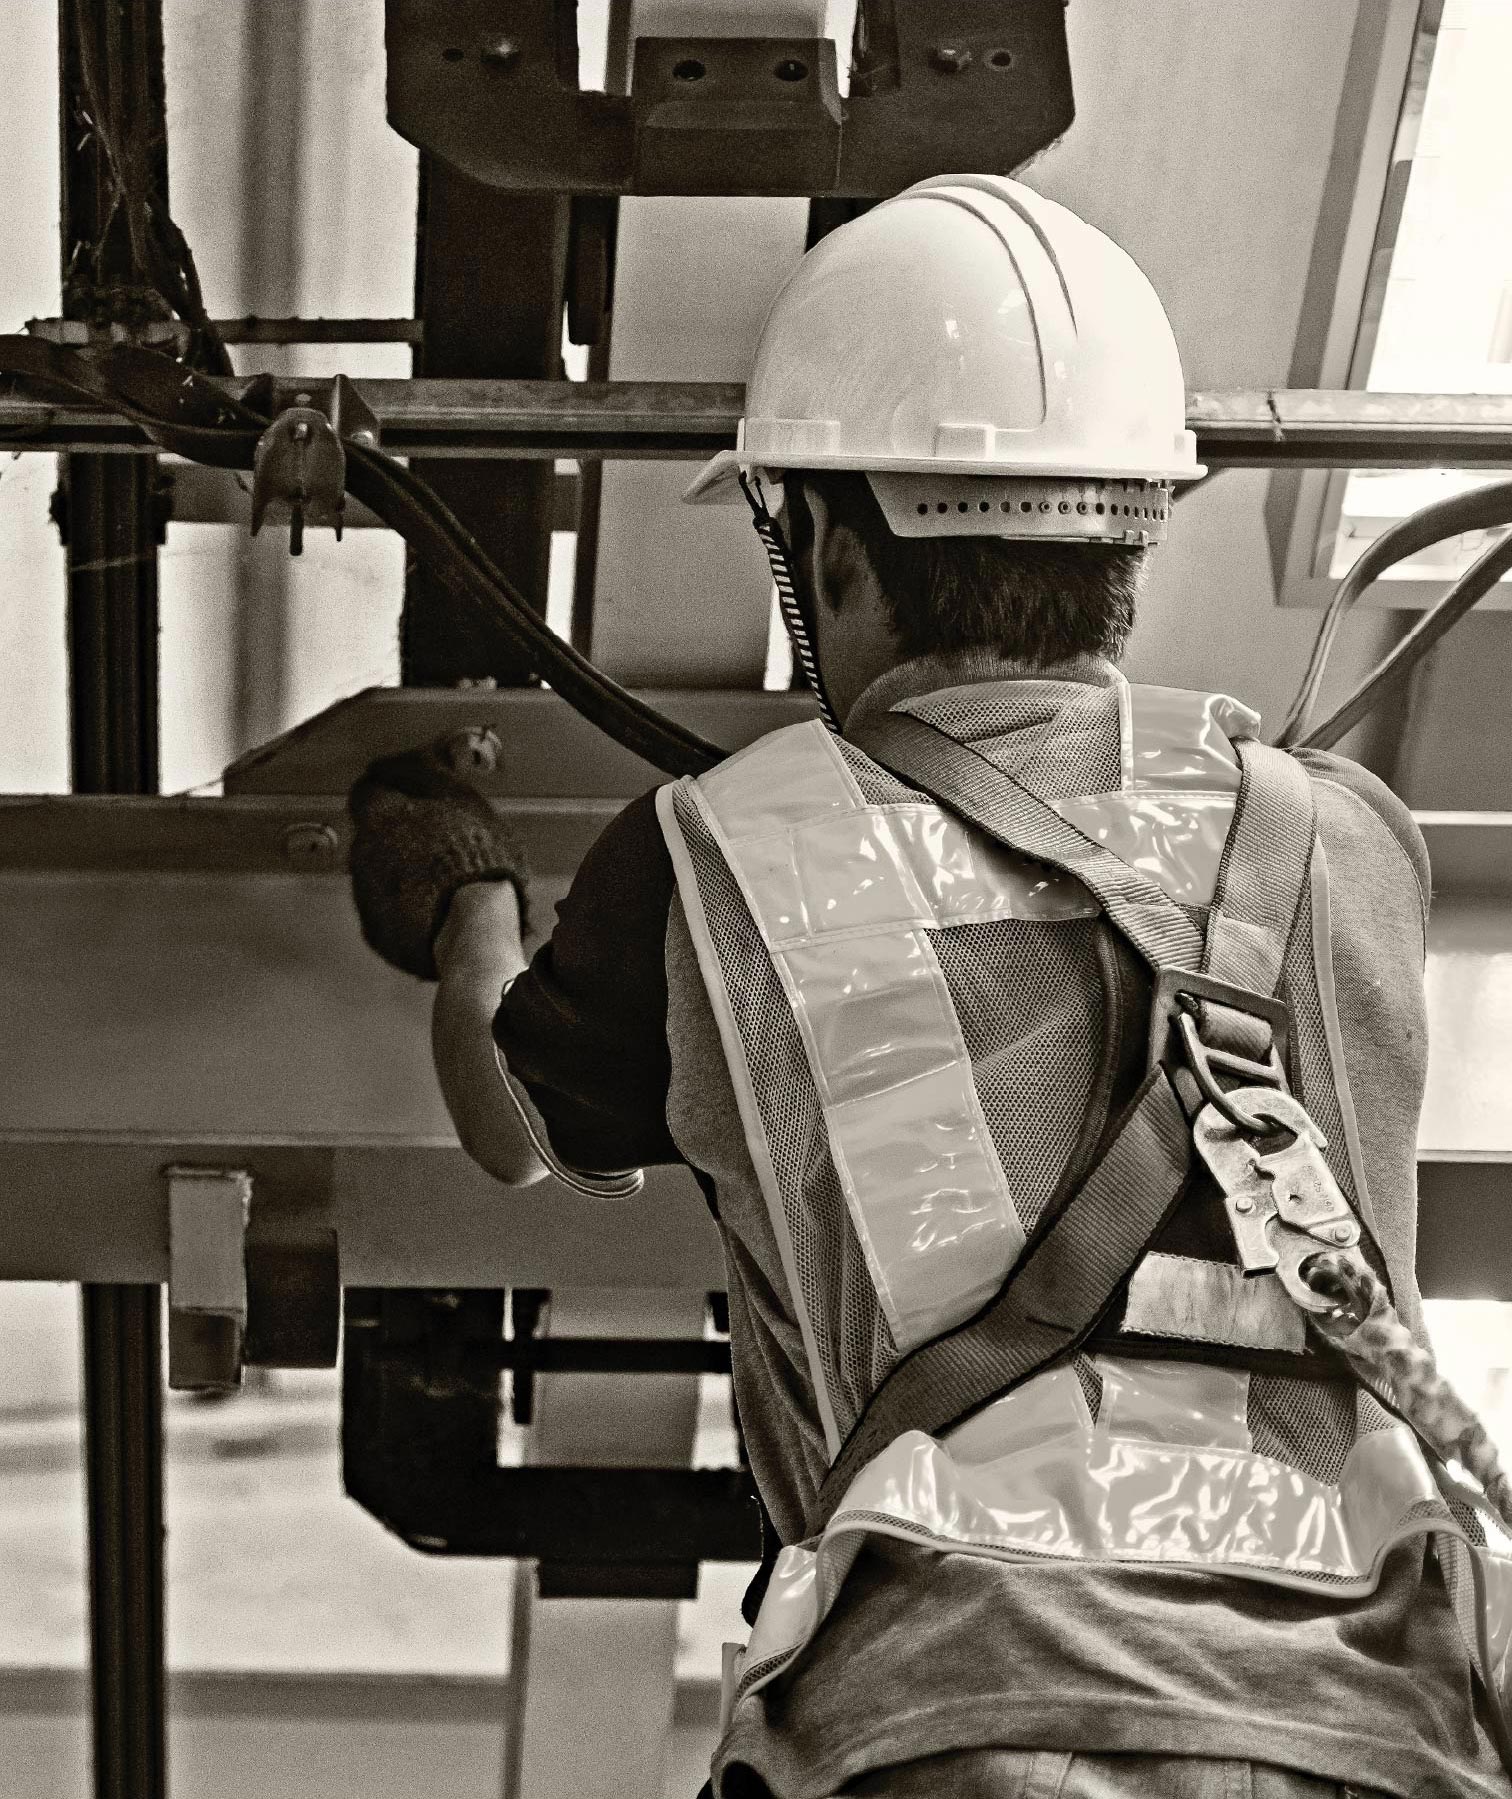 a back view of someone dress in a hard hat, harness and safety vest while handling machinery